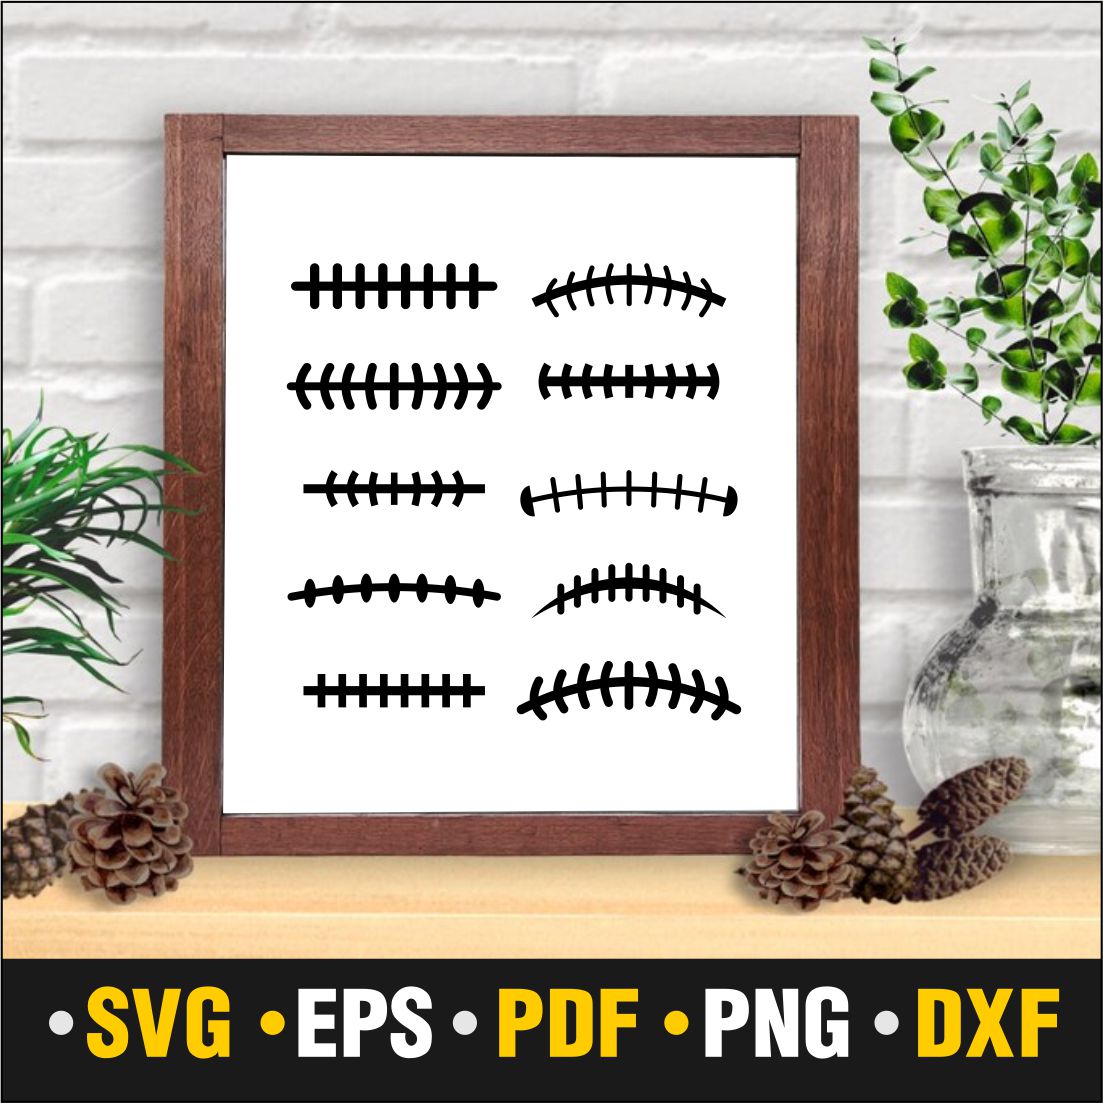 Gorgeous silhouette image of rugby ball stitches in a wooden frame